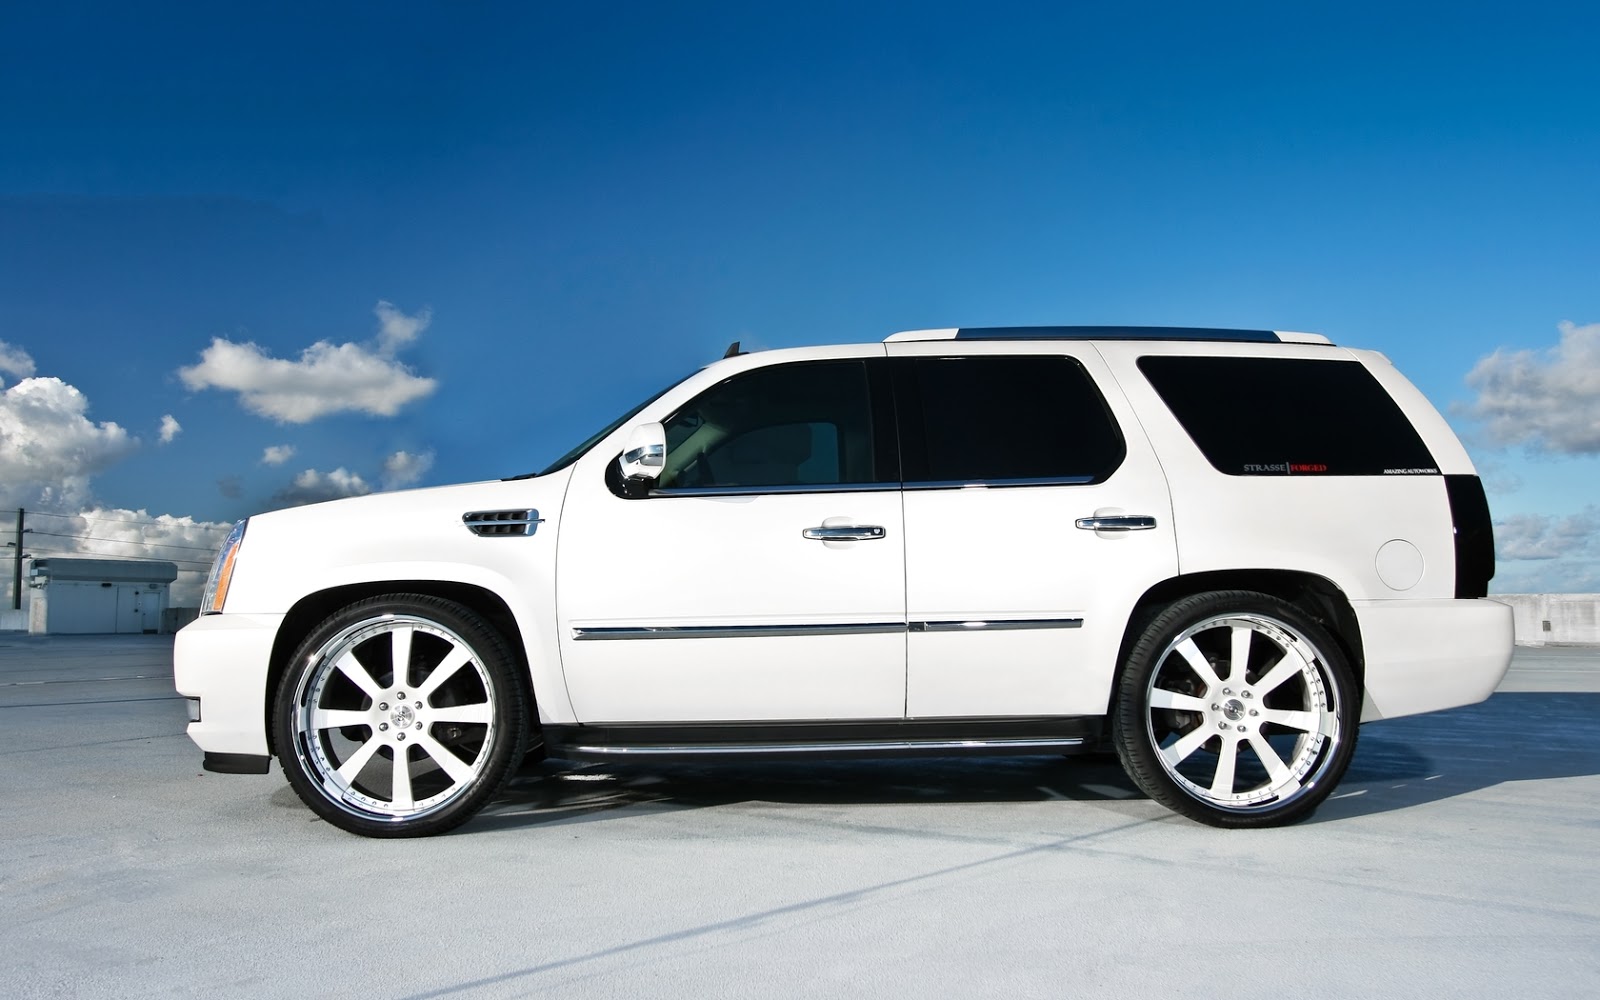 Cadillac Escalade New HD Wallpaper Now And